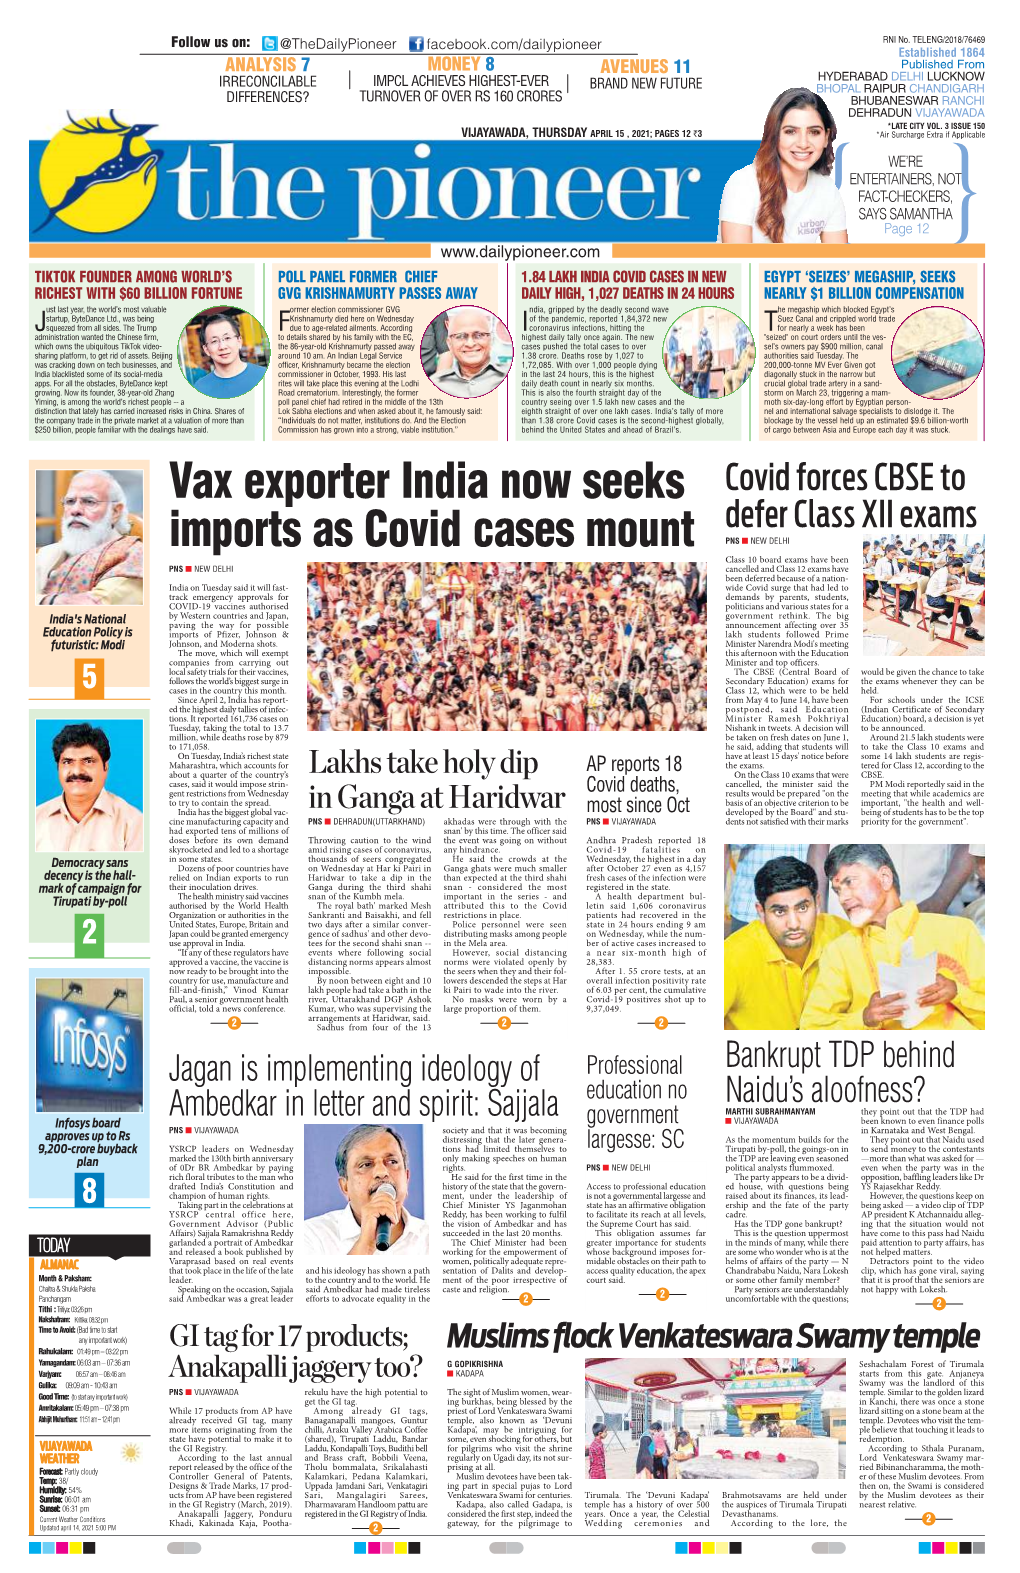 Vax Exporter India Now Seeks Imports As Covid Cases Mount